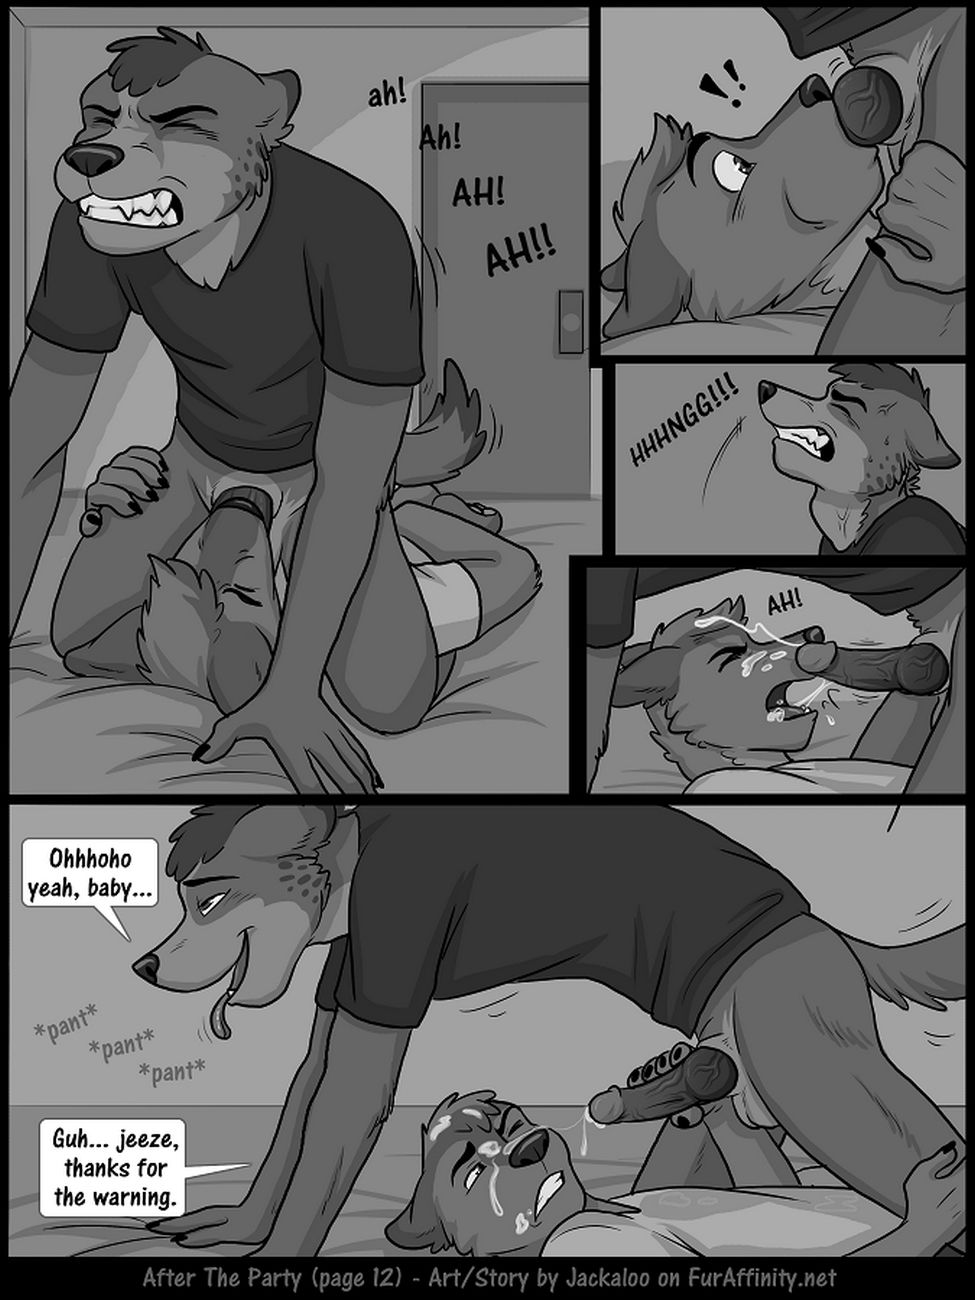 After The Party page 13